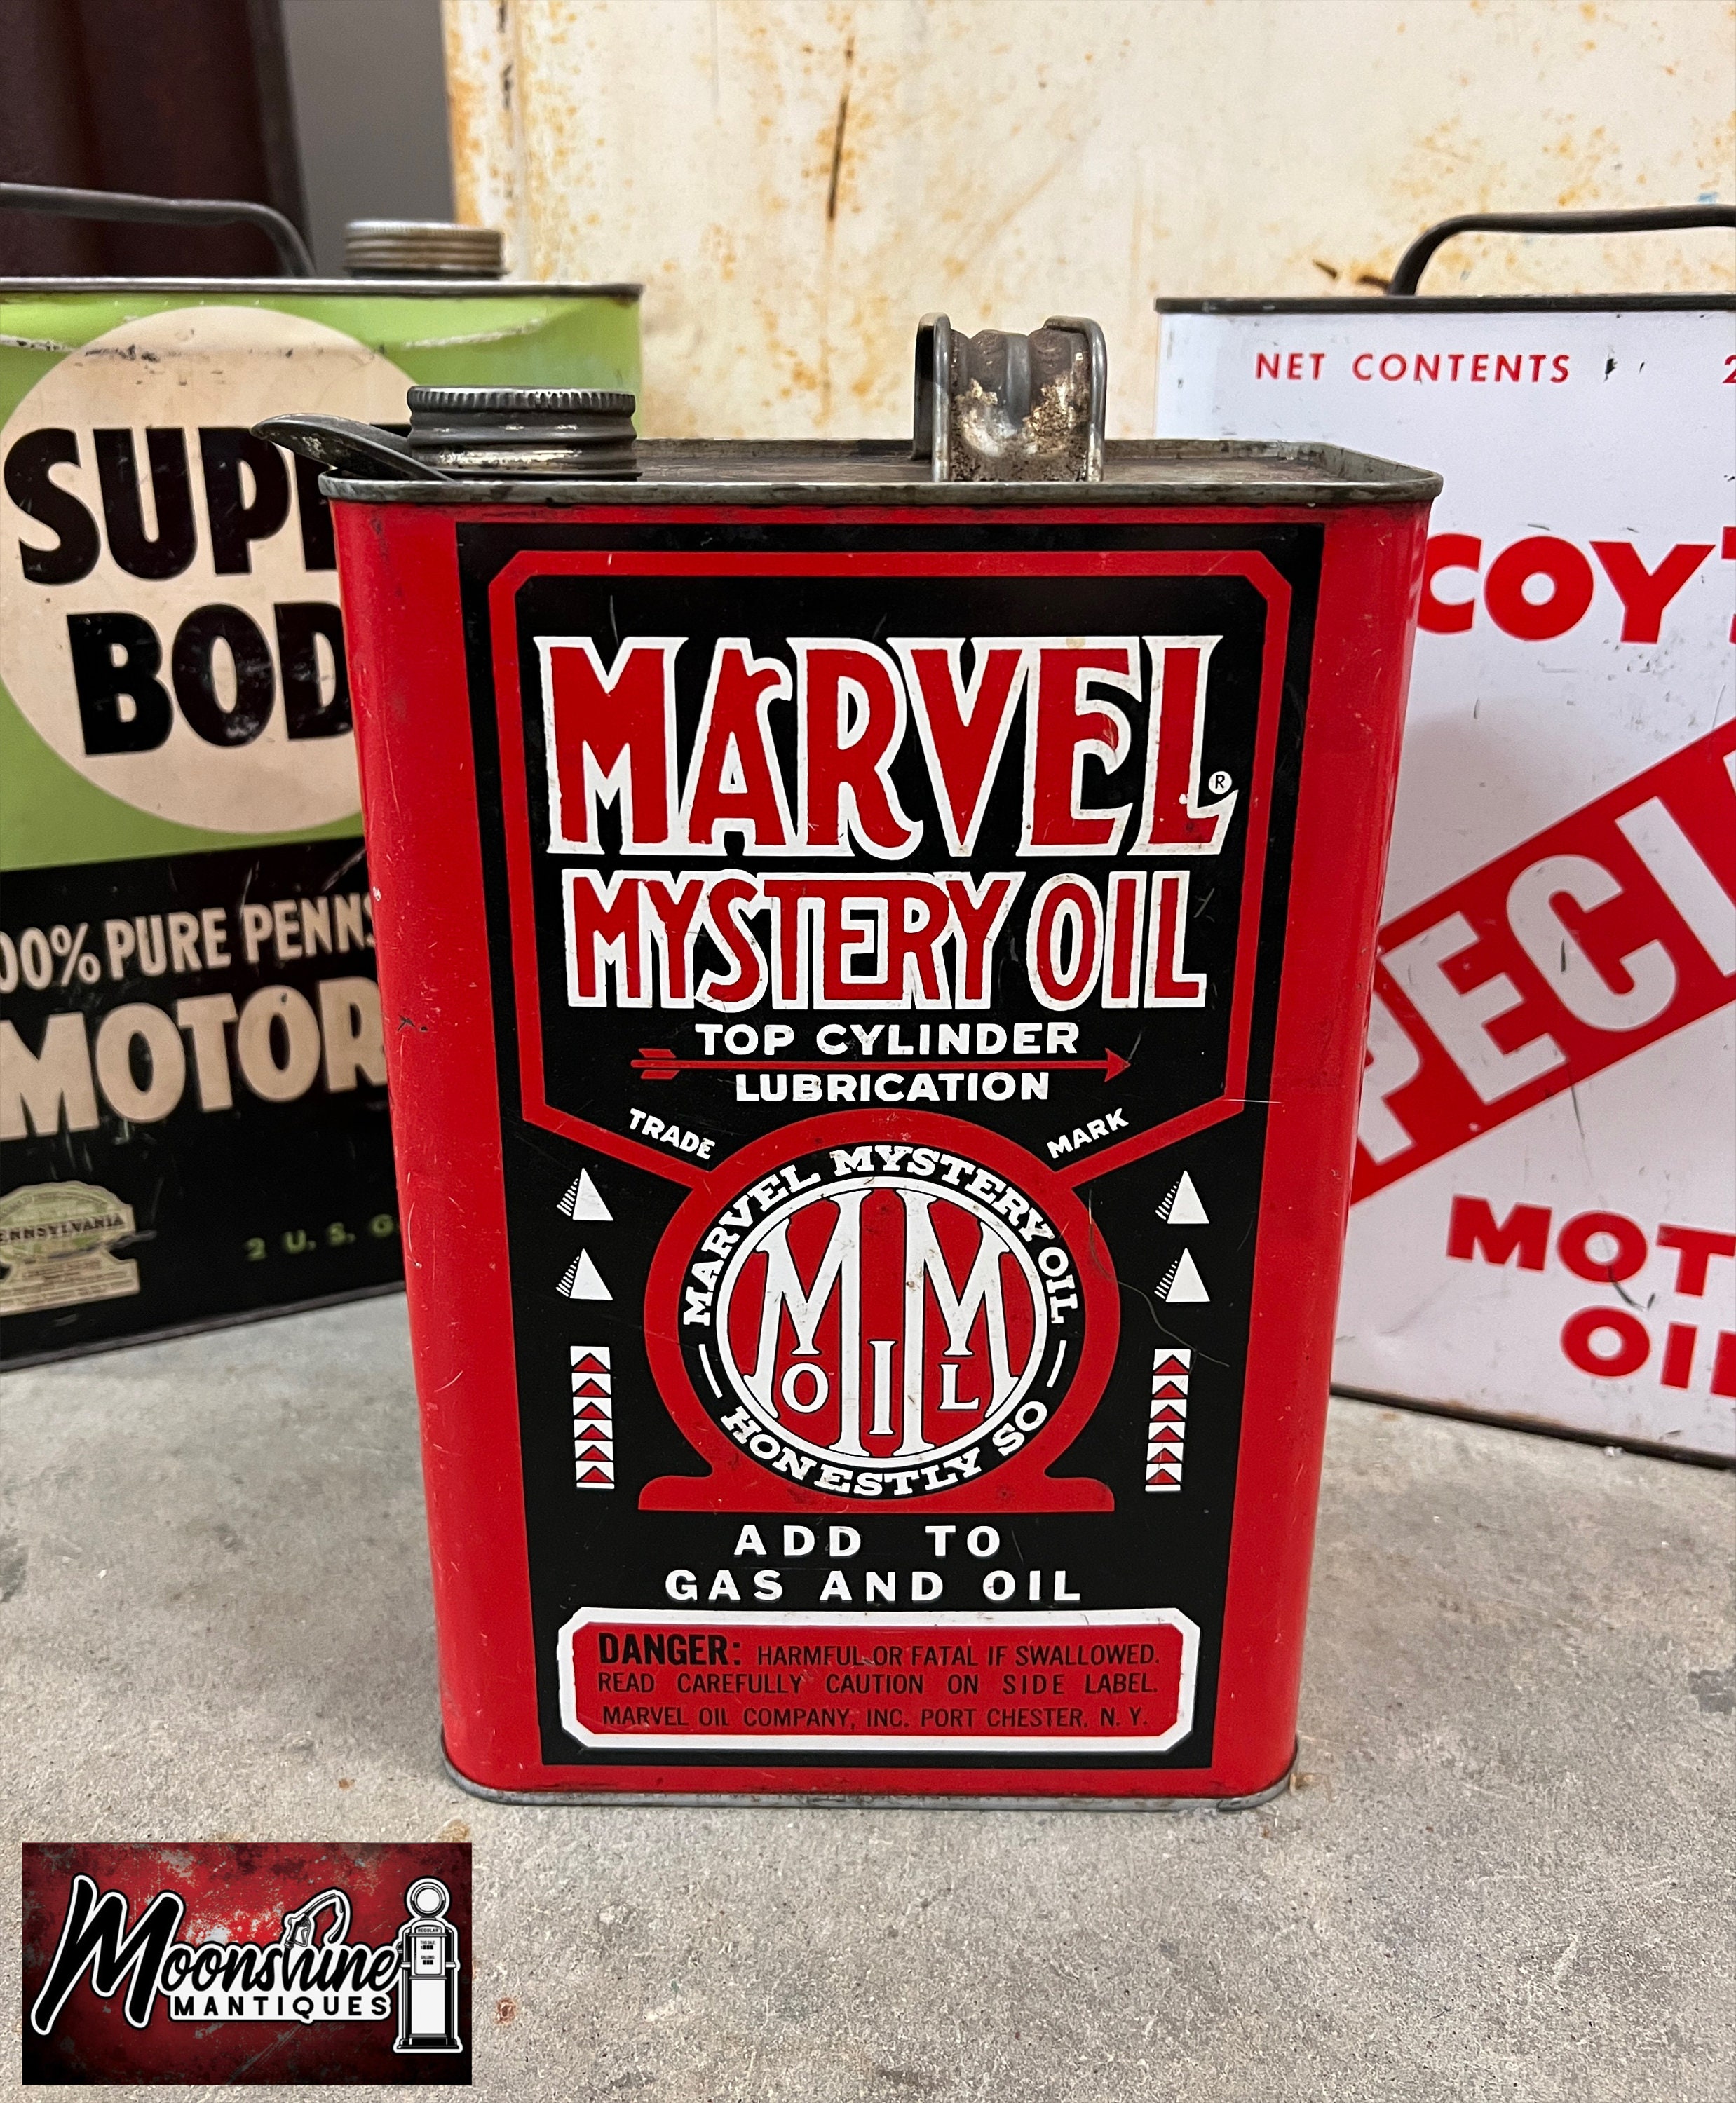 Marvel Mystery Oil 1 Gallon Advertising Can